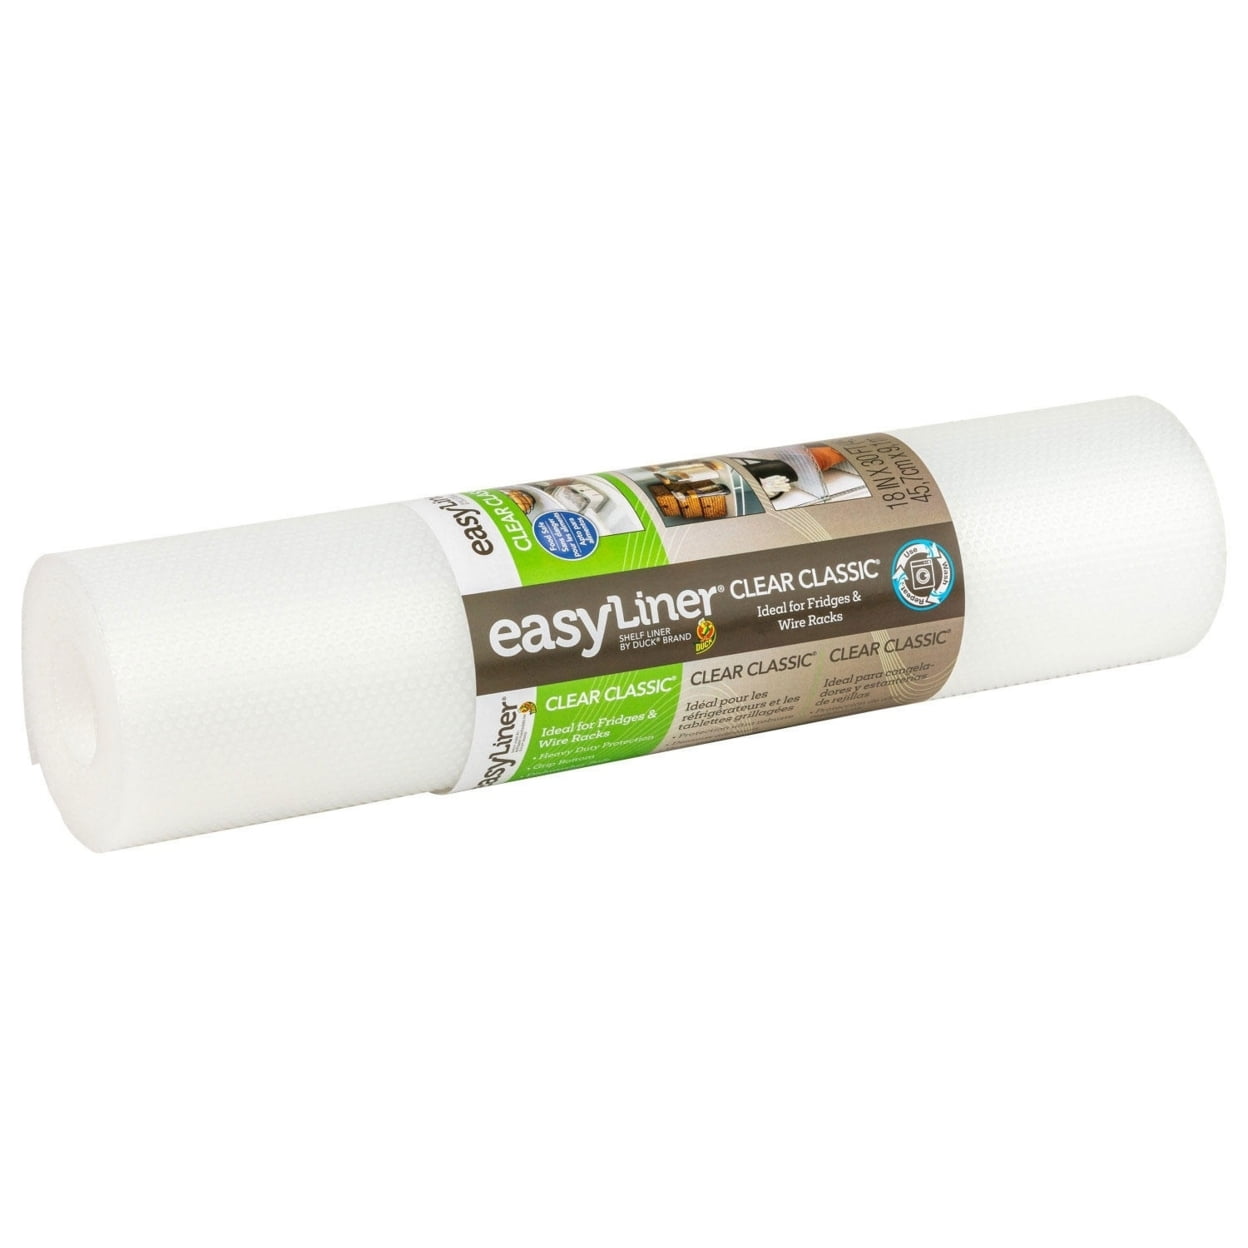 Duck EasyLiner Adhesive Clear Laminate 20-in x 30-ft Clear Shelf